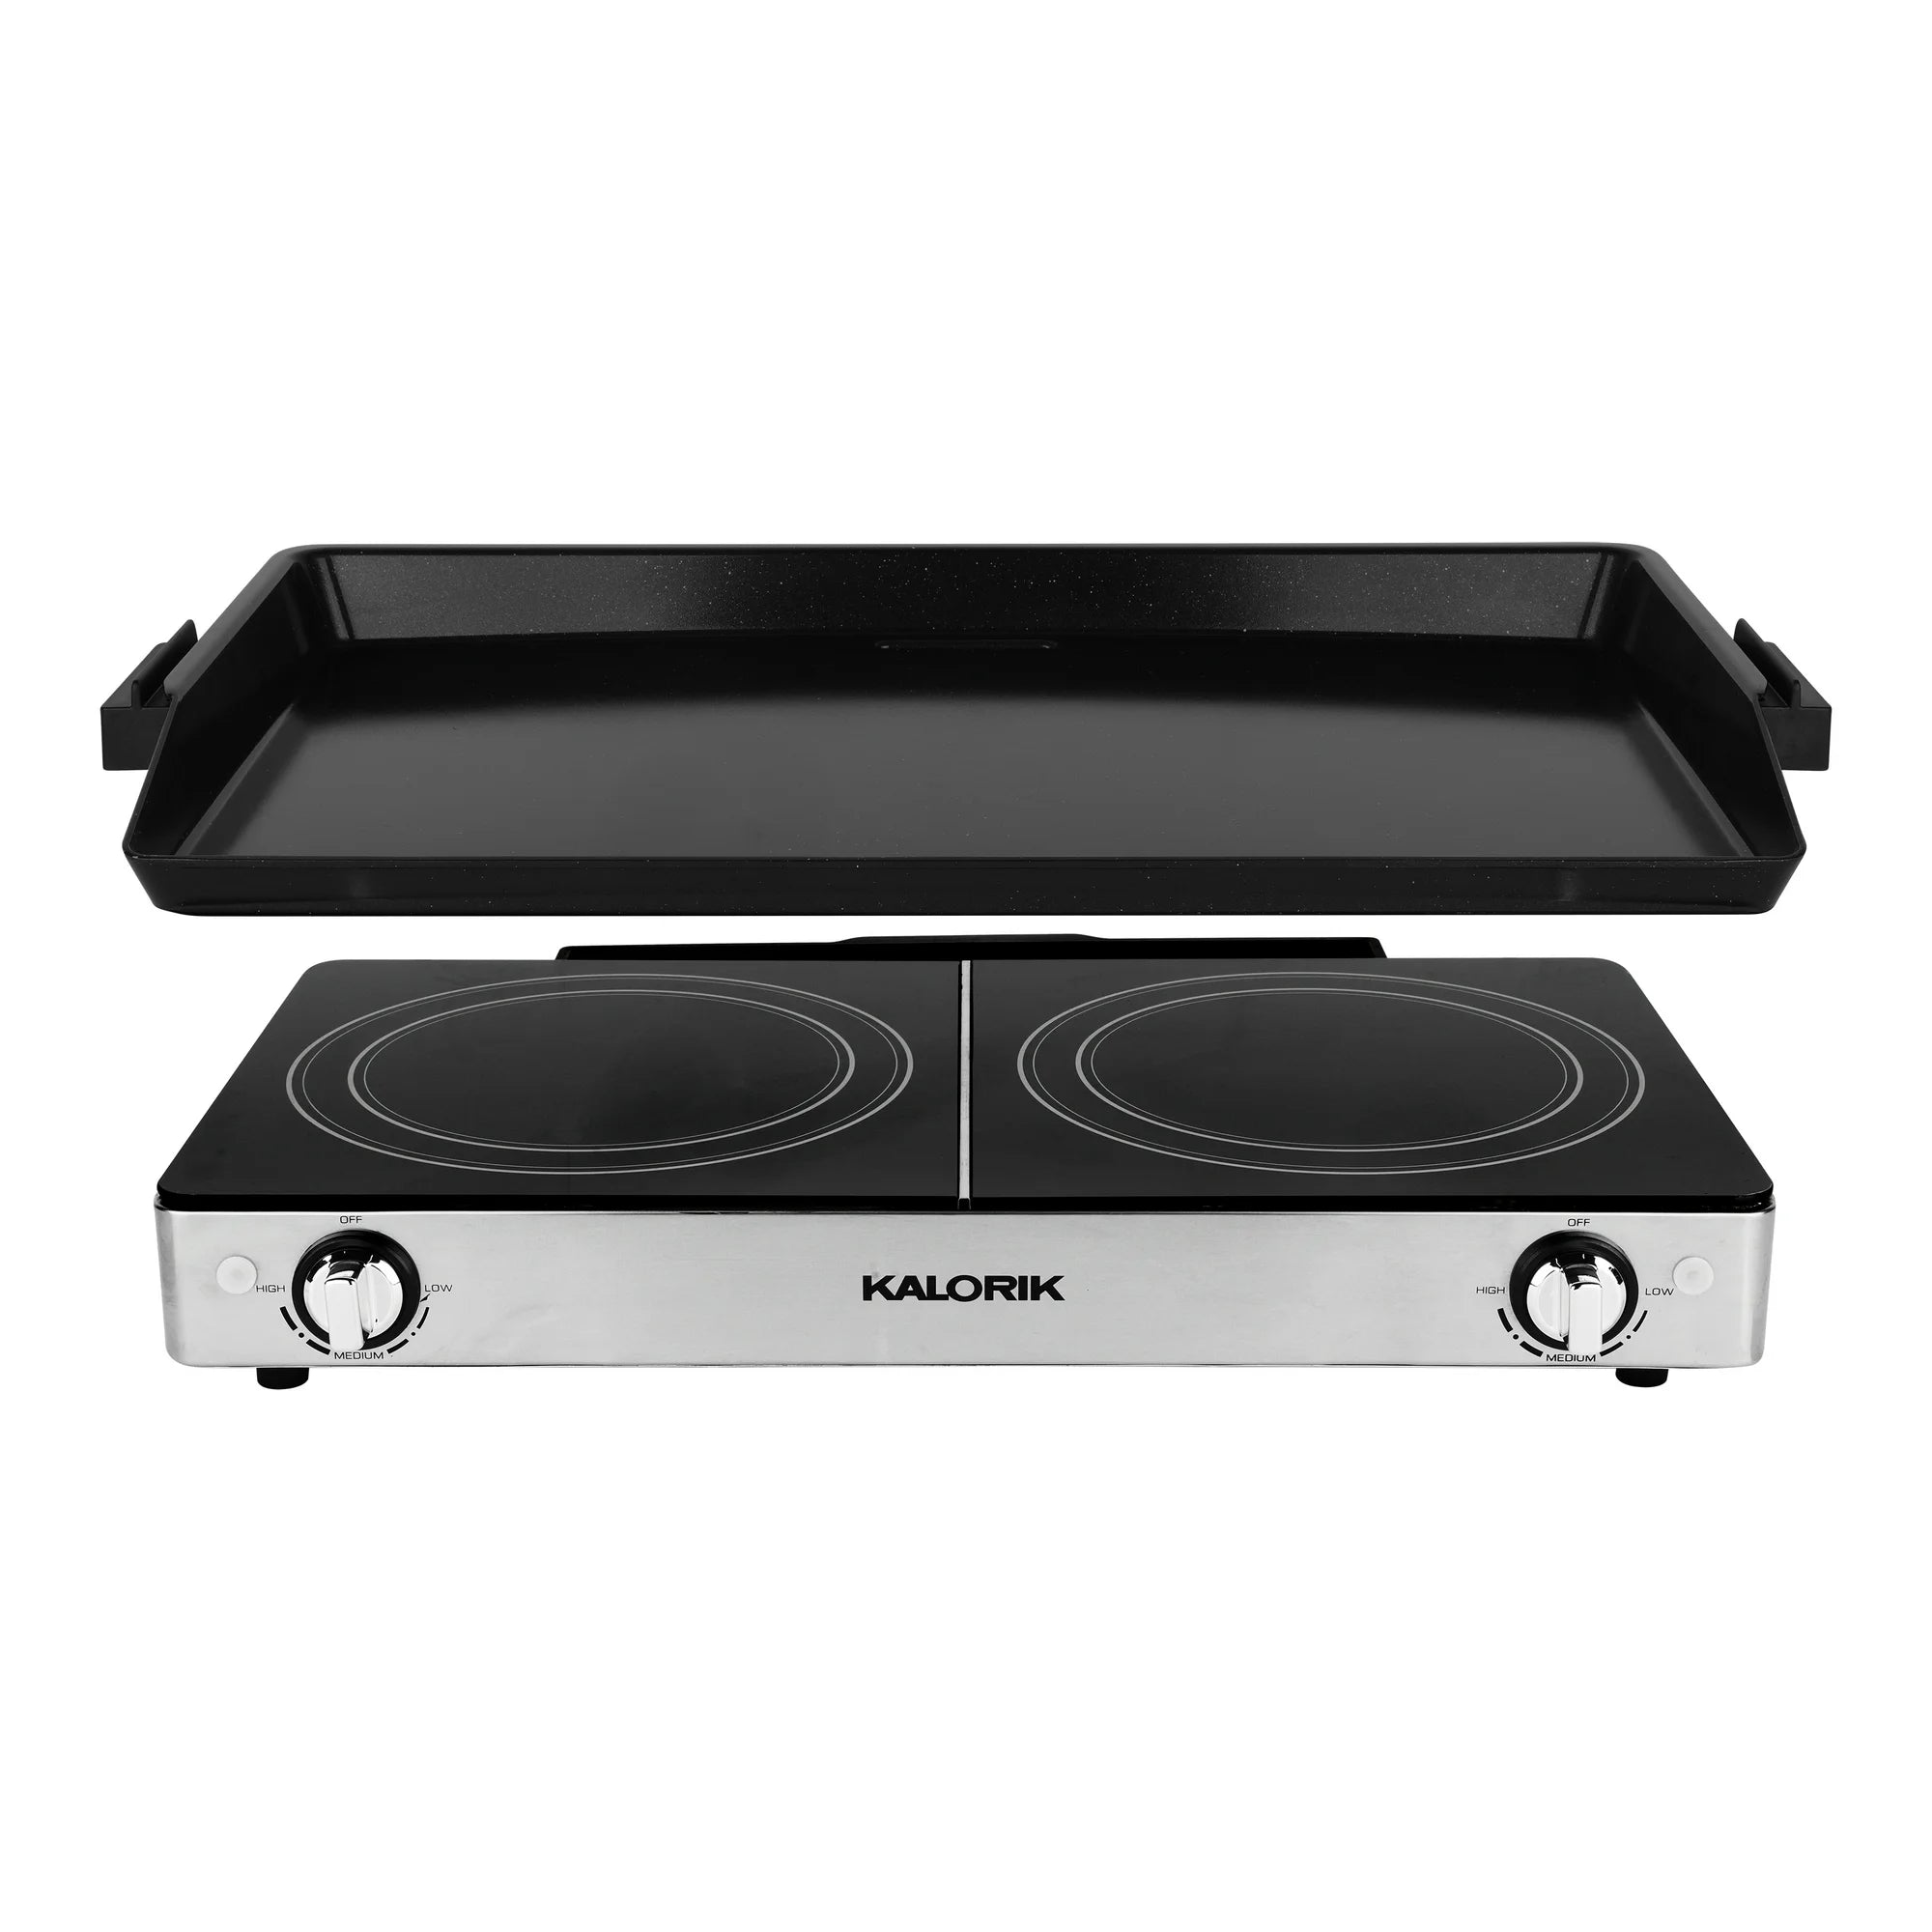 Kalorik Pro Stainless Steel Double Griddle and Cooktop